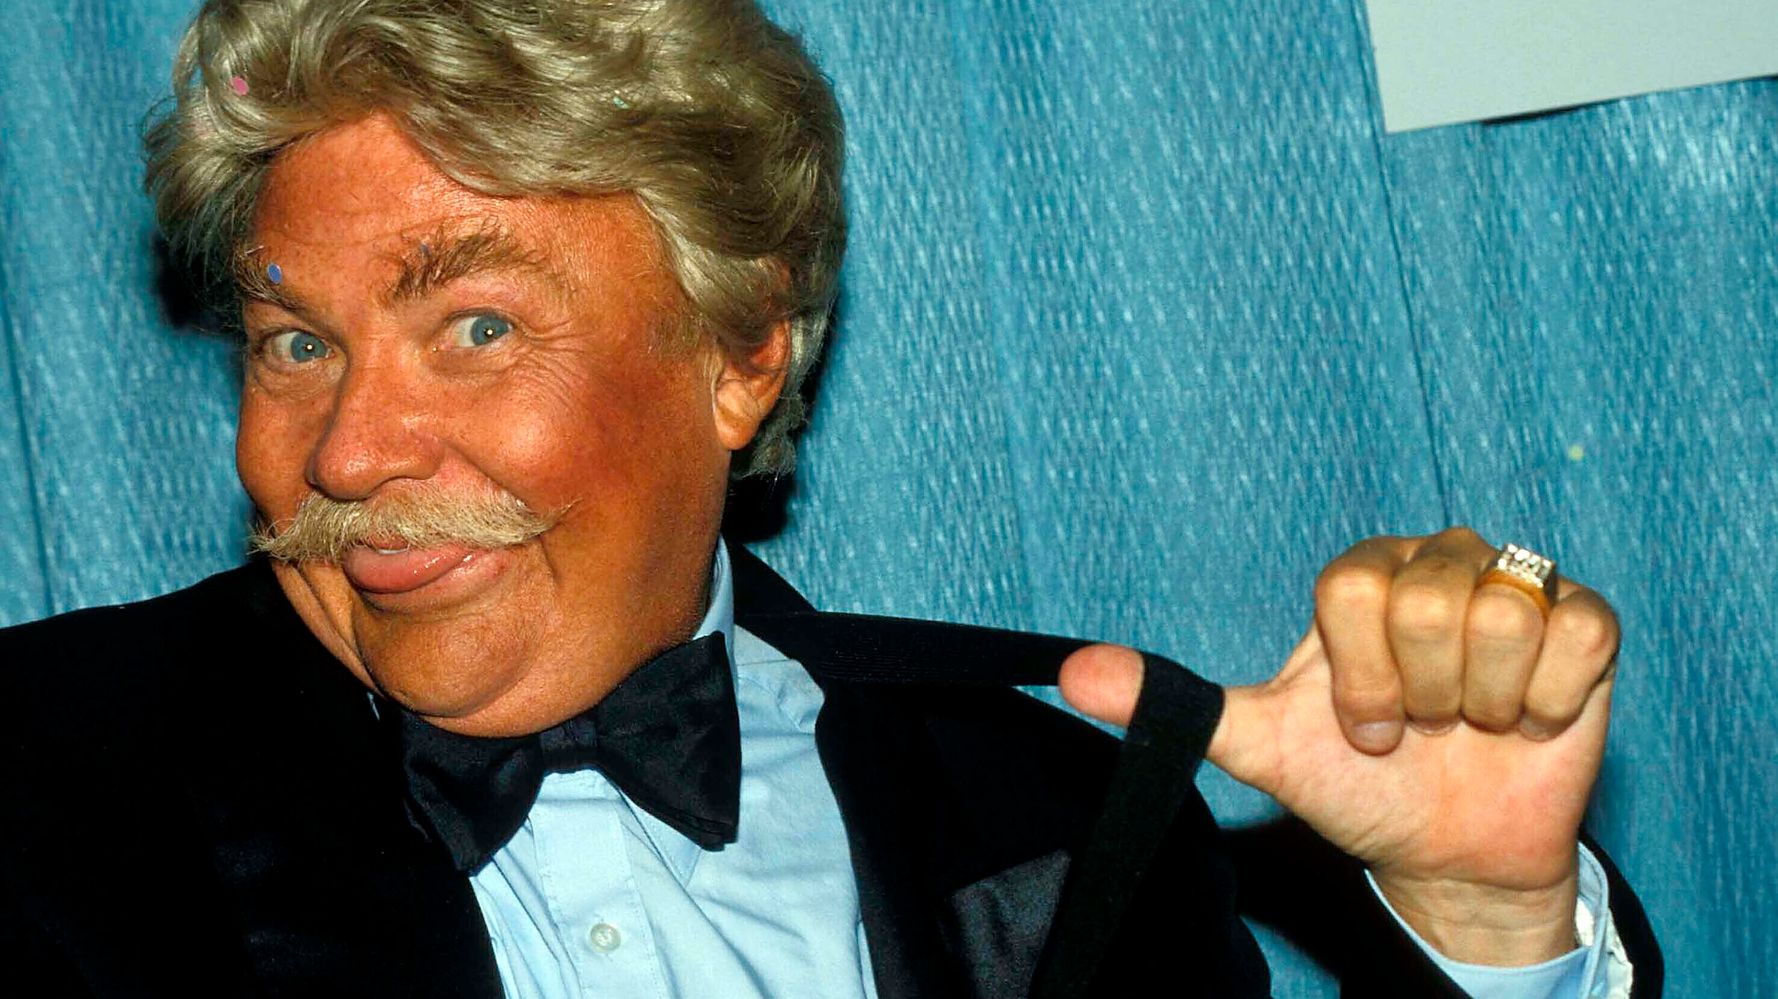 actors who play themself - Rip Taylor